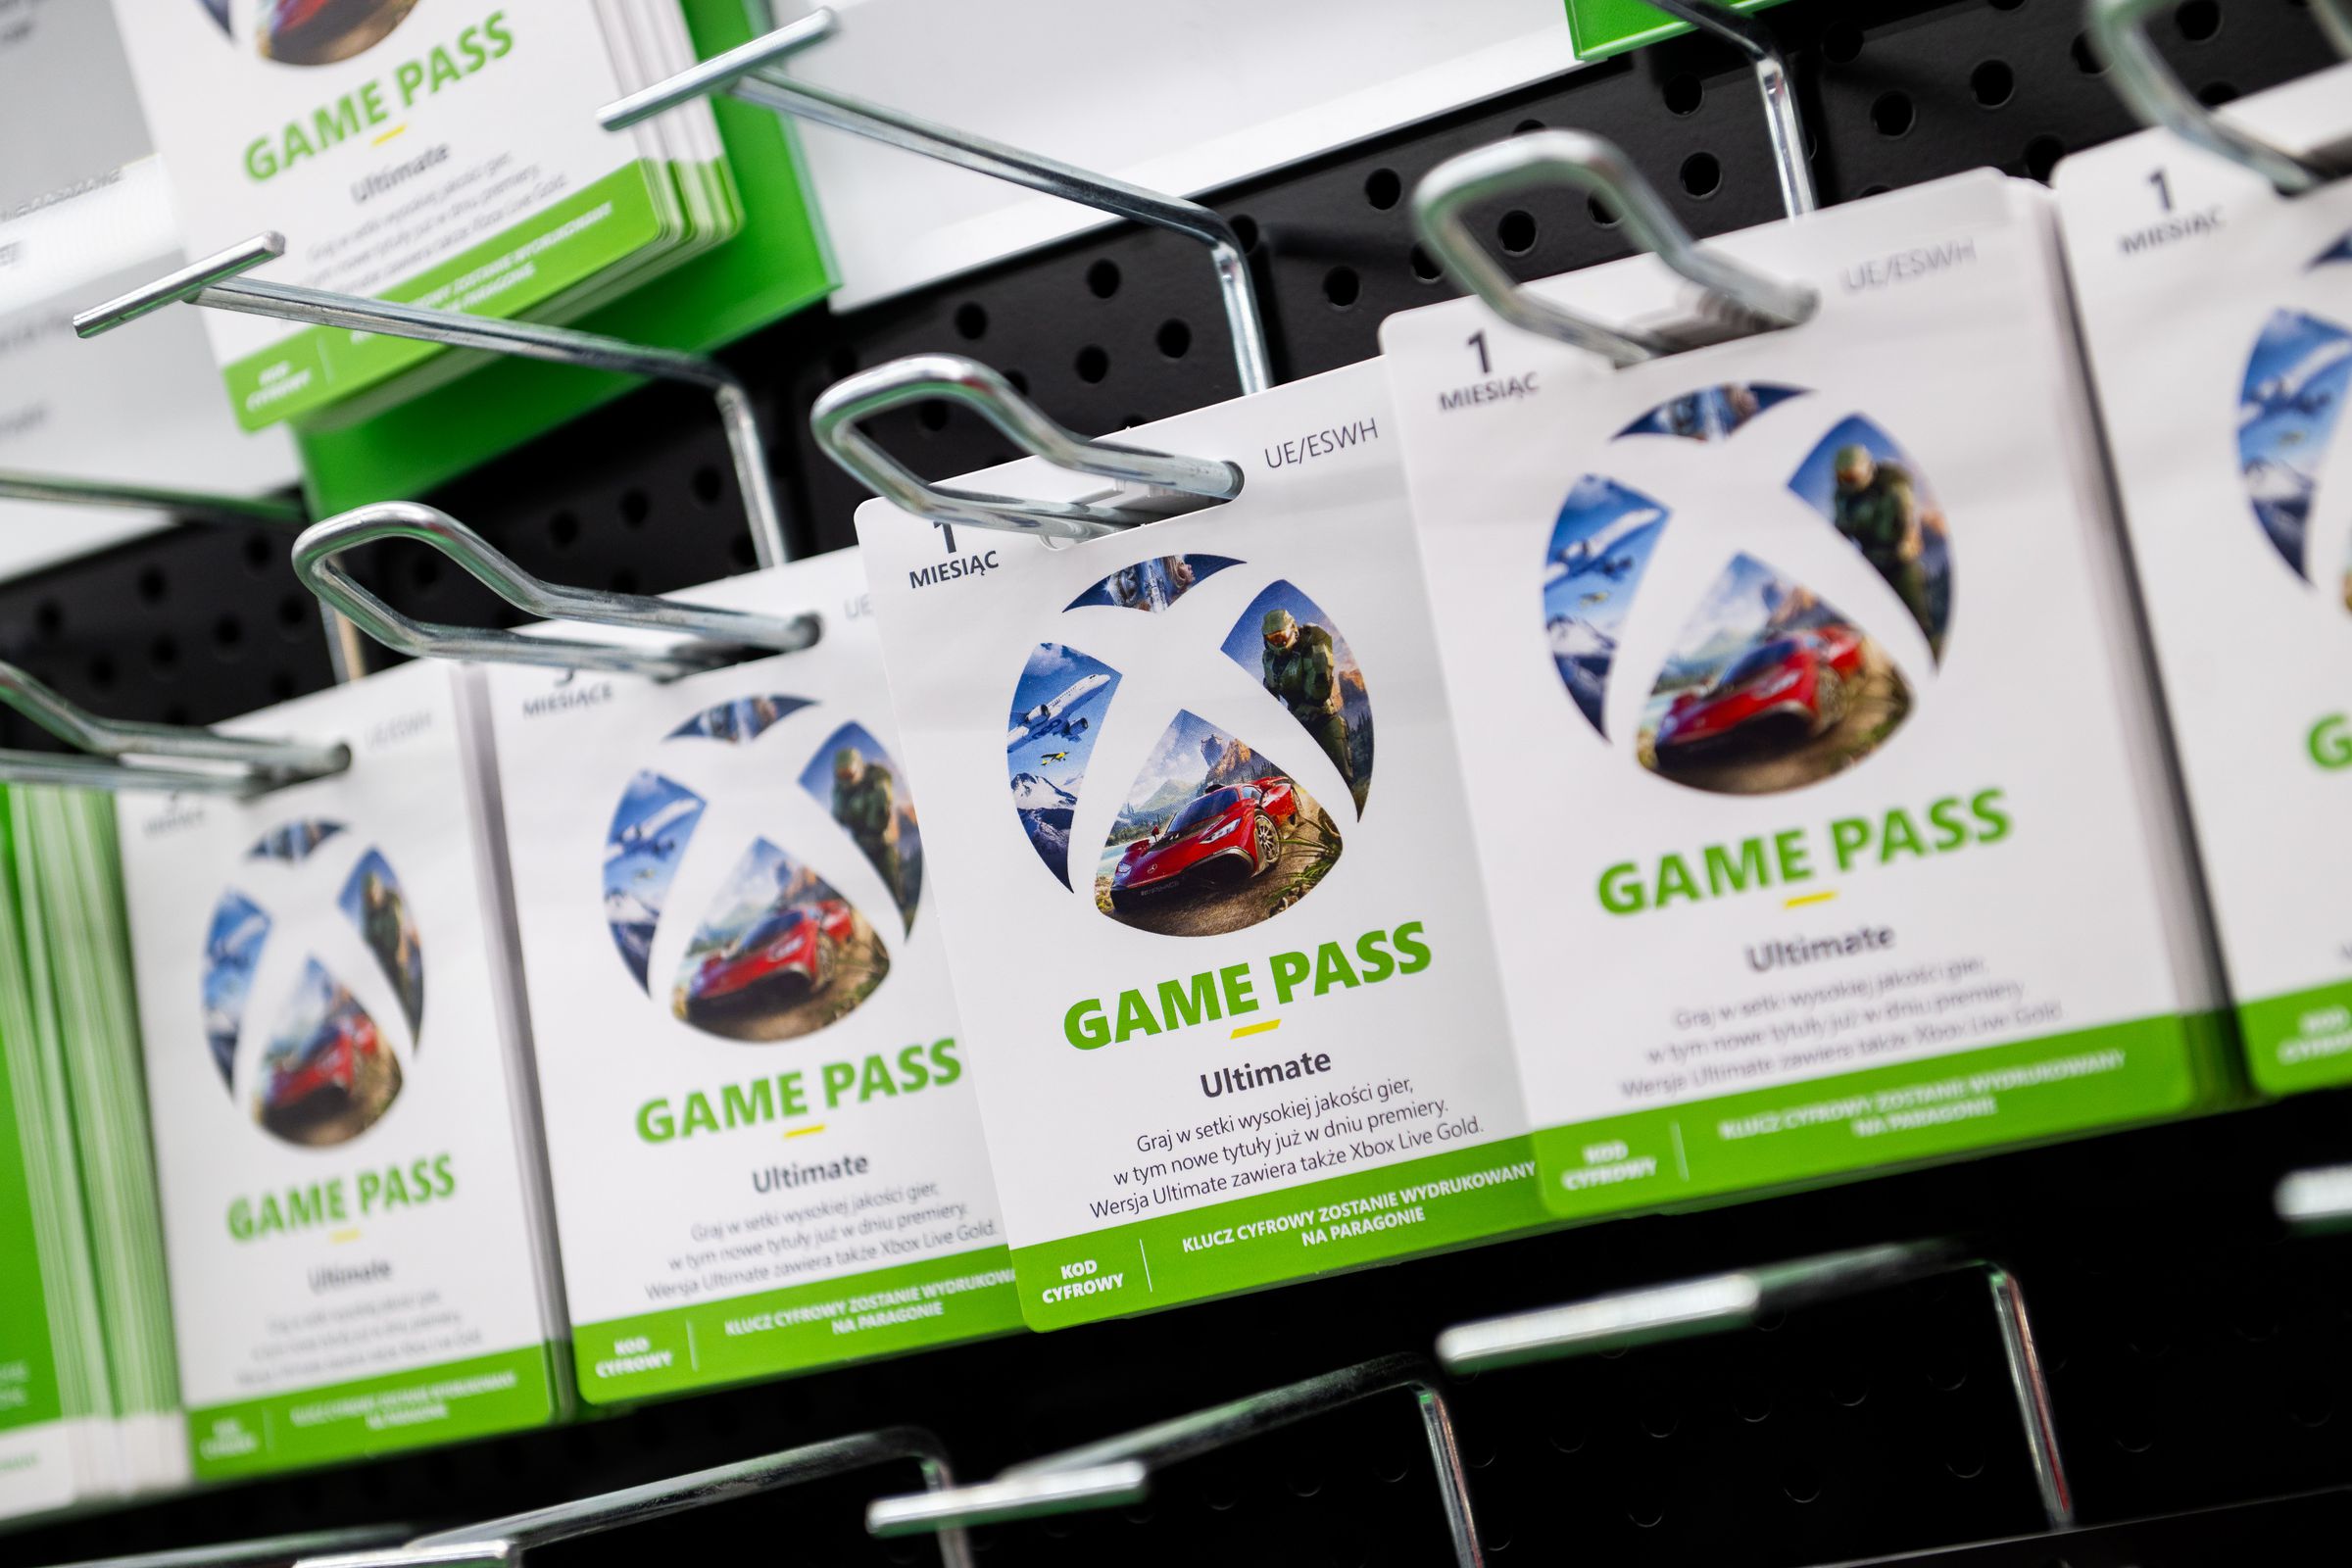 Game Pass was already the best deal in gaming, but this discount makes it even better. Photo by Mateusz Slodkowski / SOPA Images / LightRocket via Getty Images